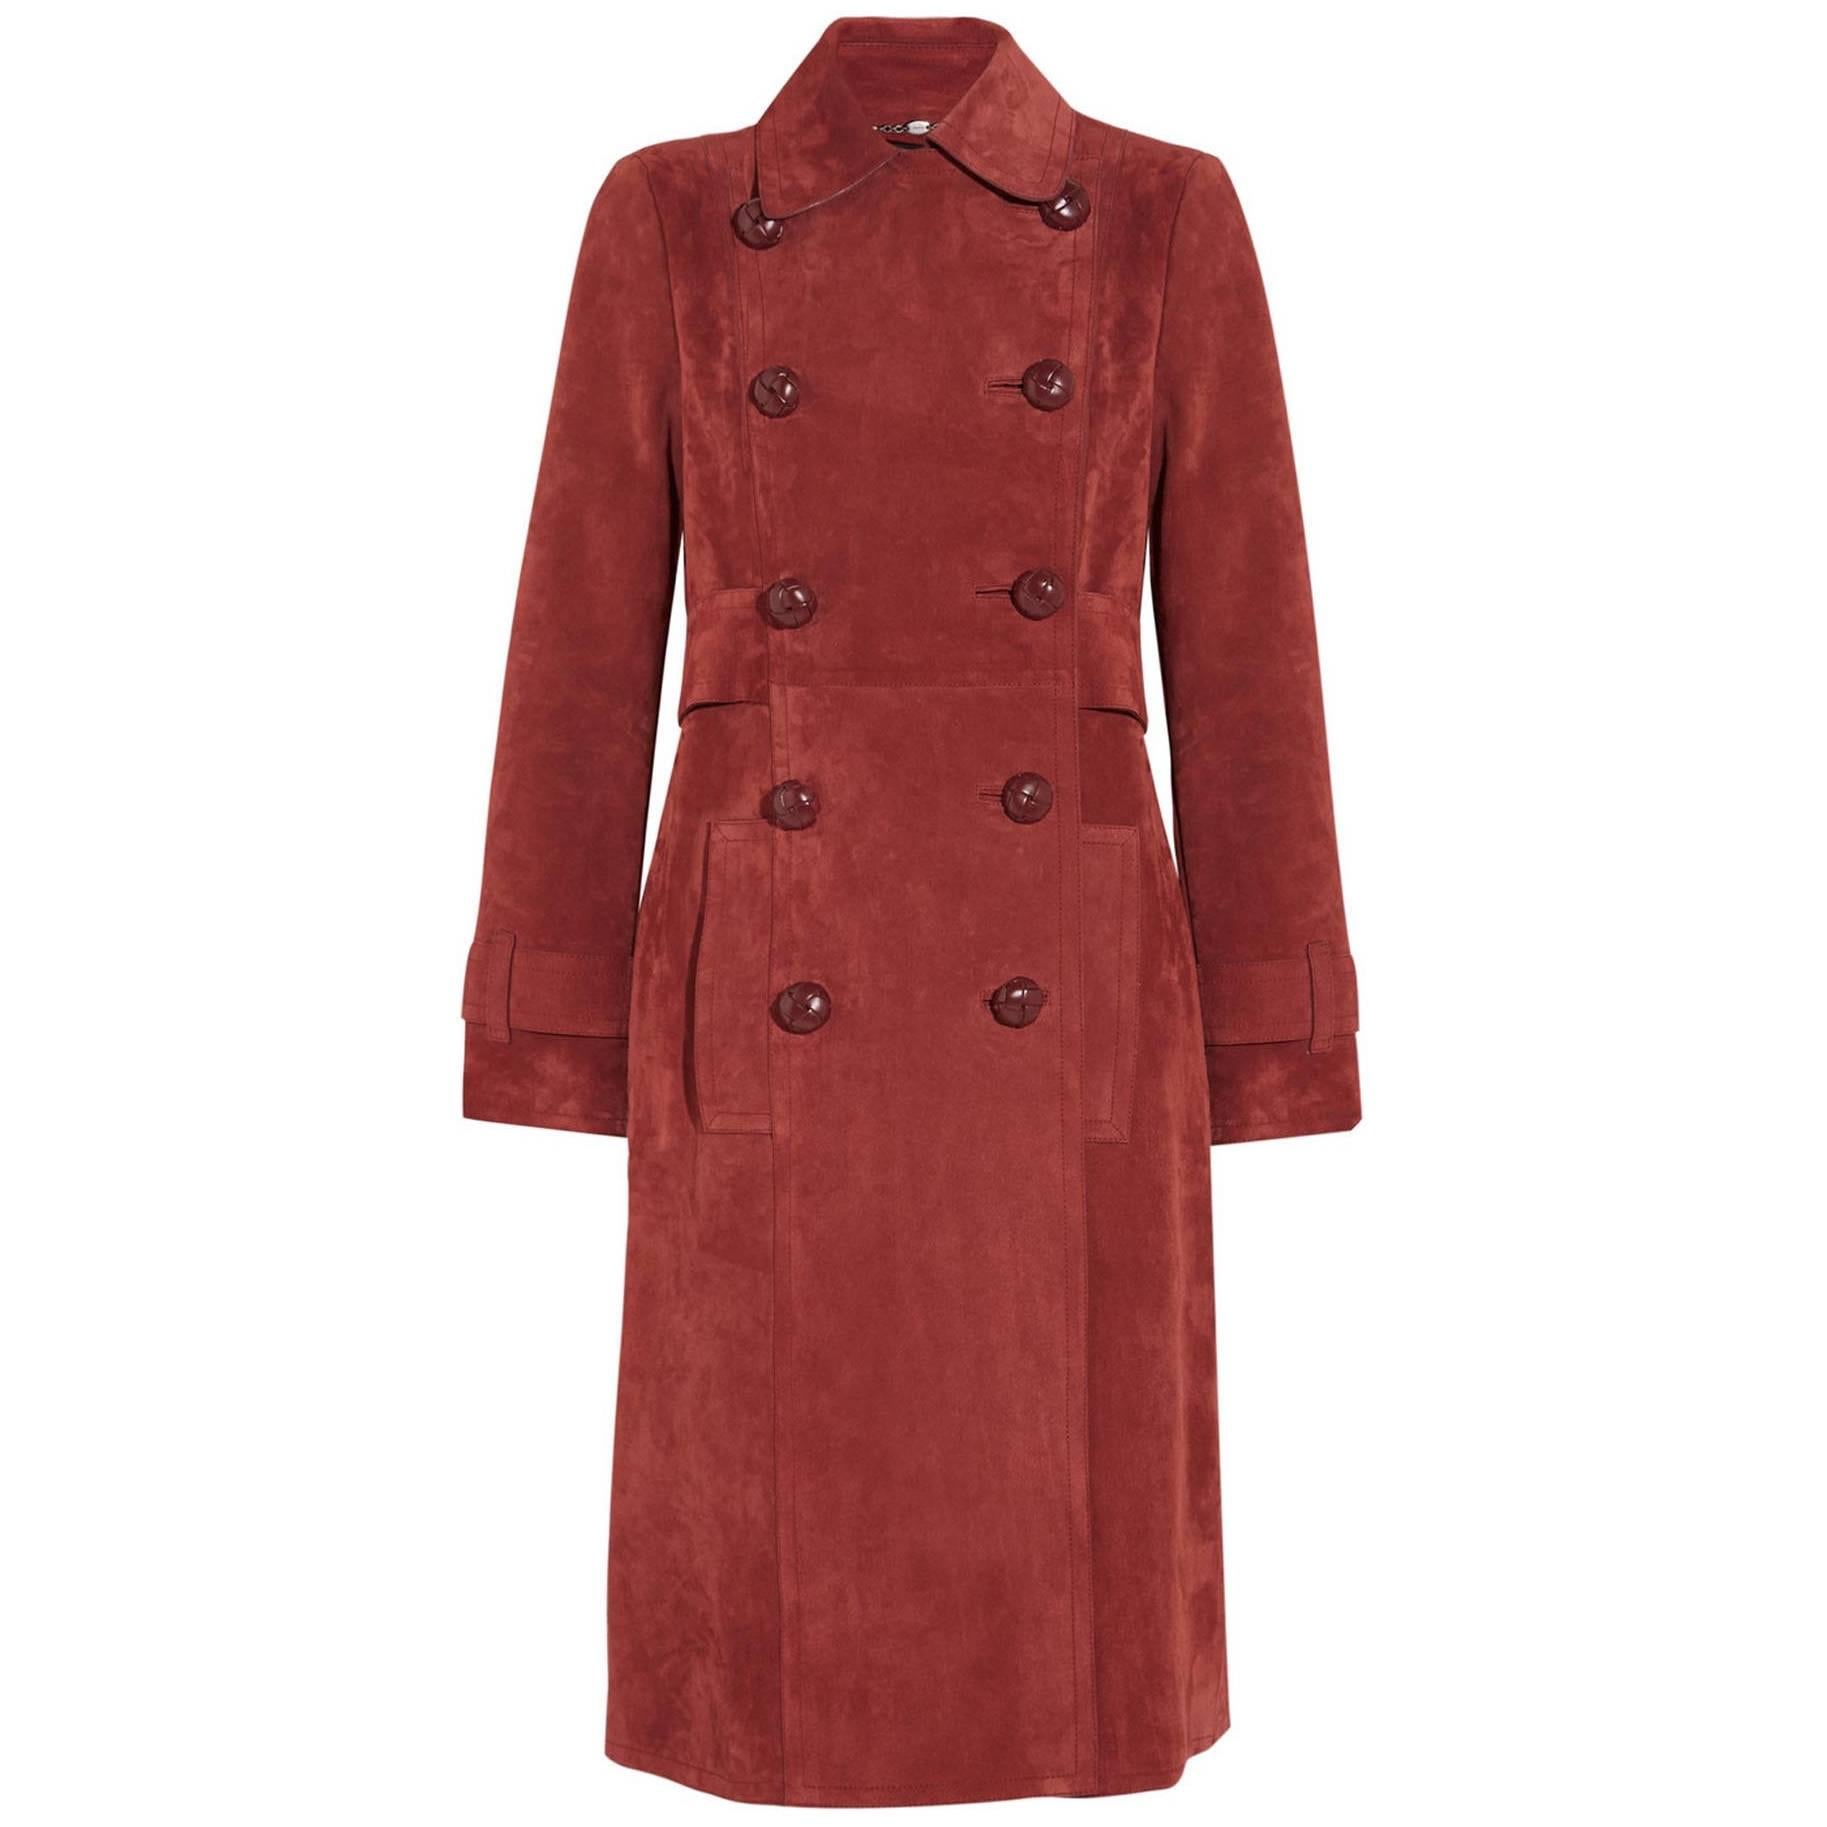 New Gucci Brick Red Suede Belted Leather Buttons Women's Trench Coat